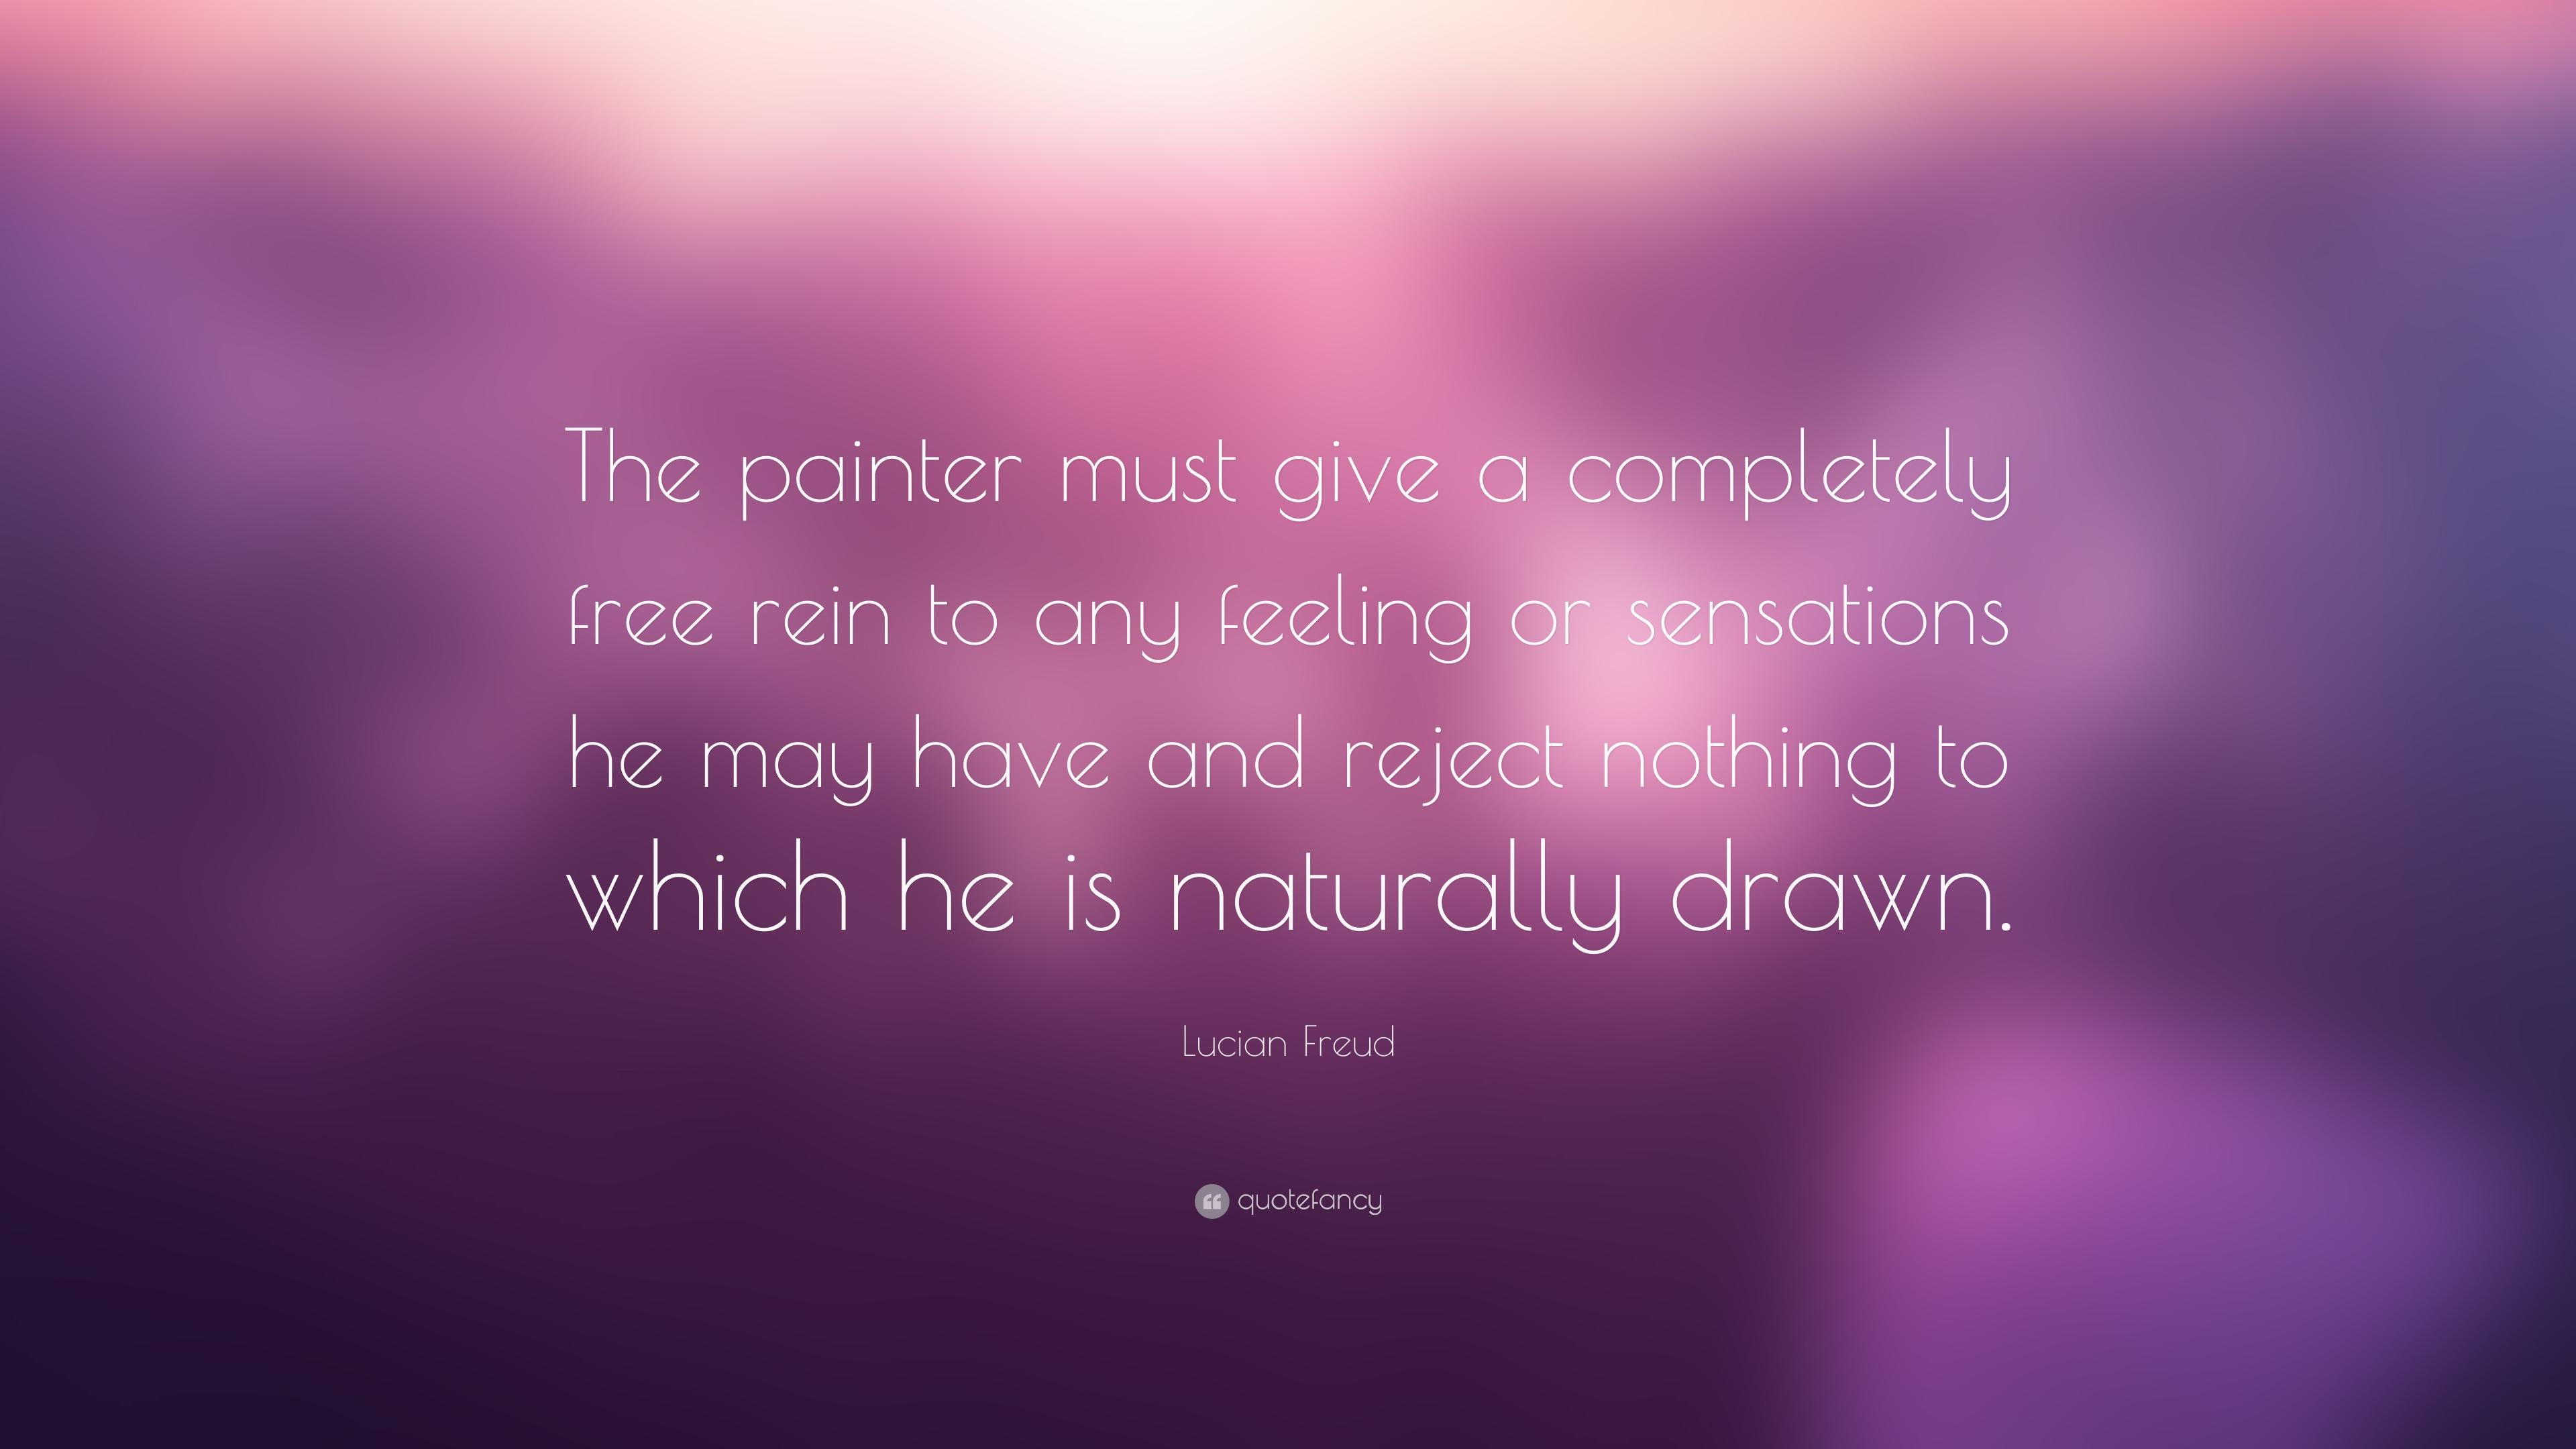 Lucian Freud Quote: “The painter must give a completely free